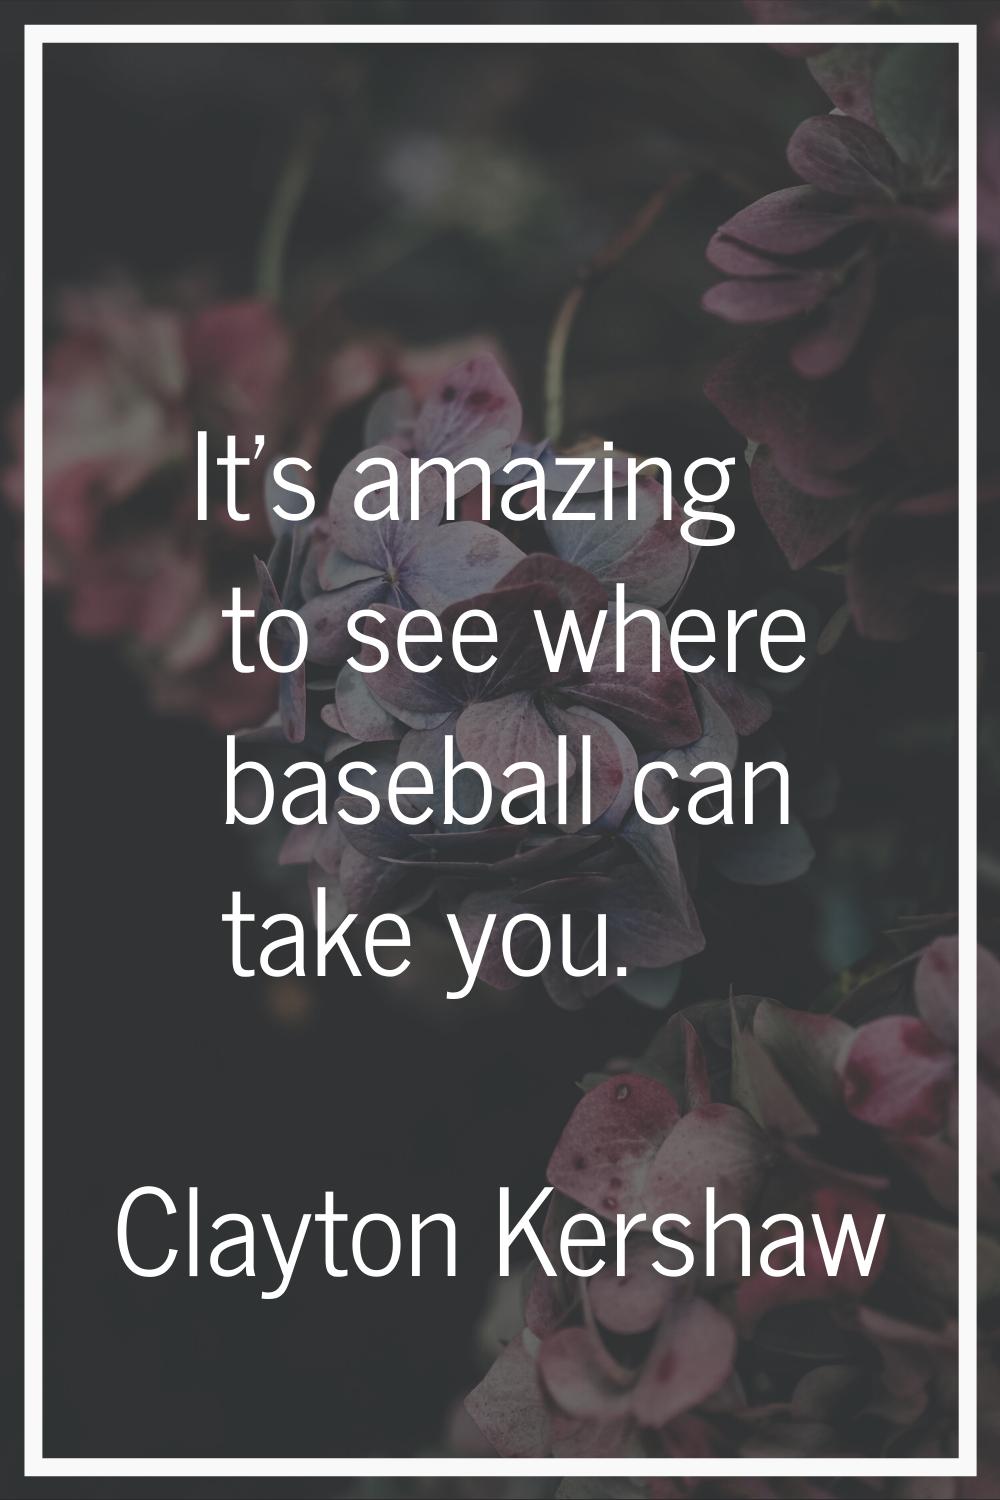 It's amazing to see where baseball can take you.